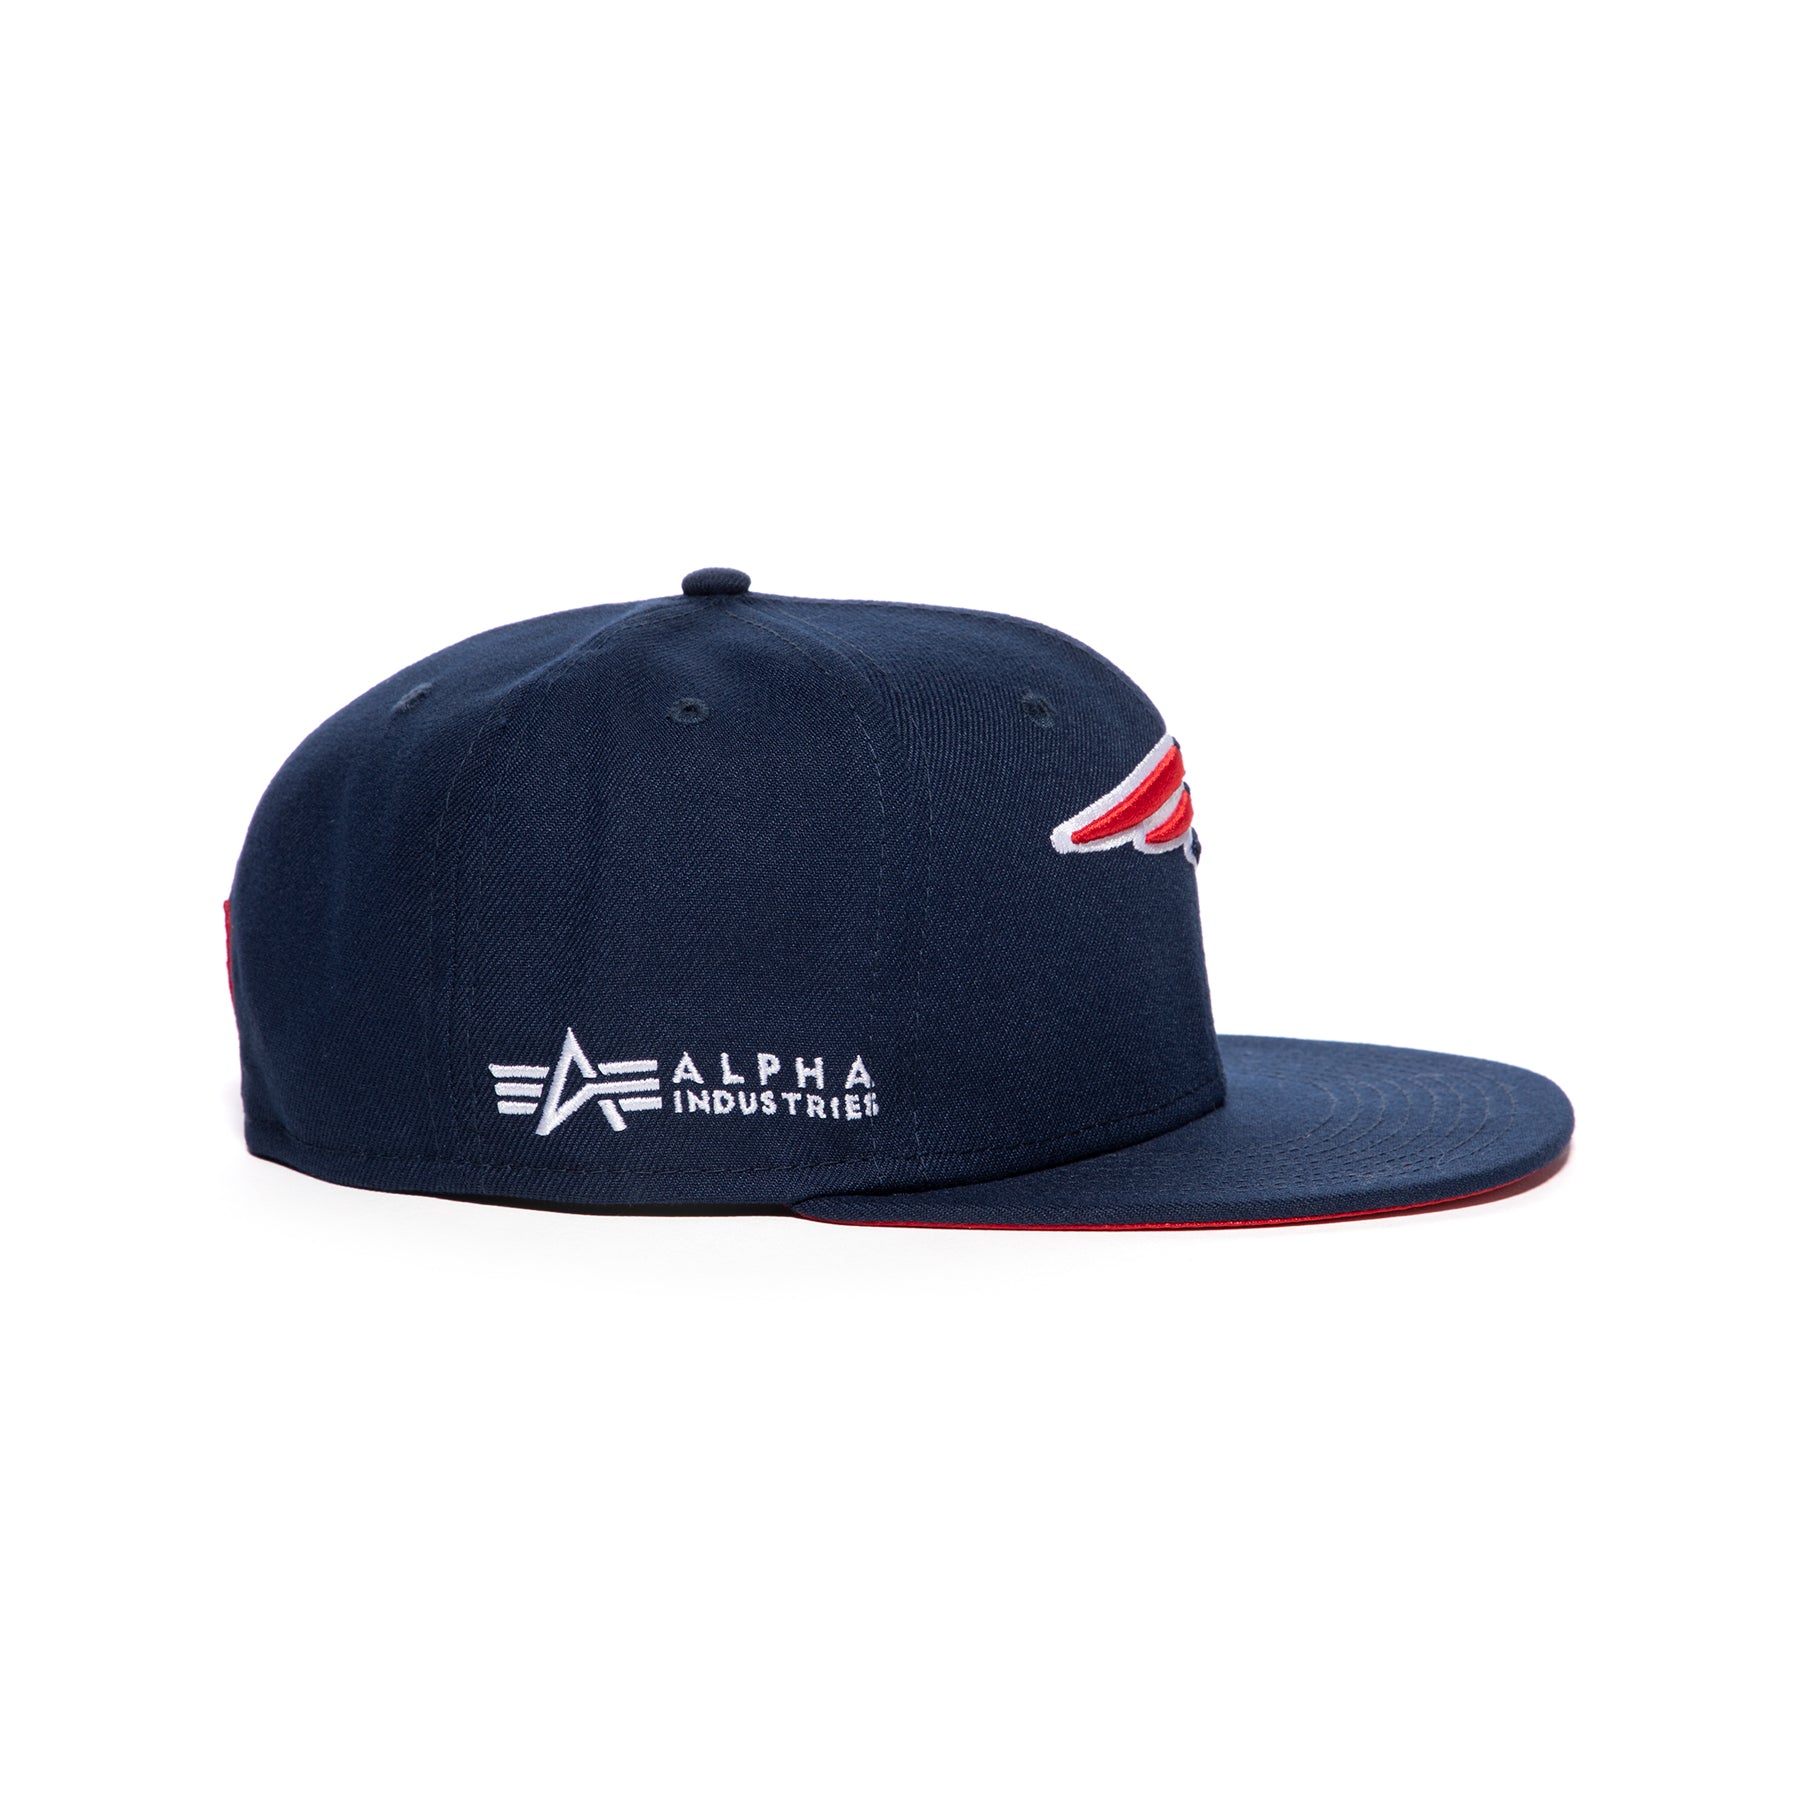 x New Blue Era Hat Industries England New Concepts Fitted – Alpha Patriots 59Fift